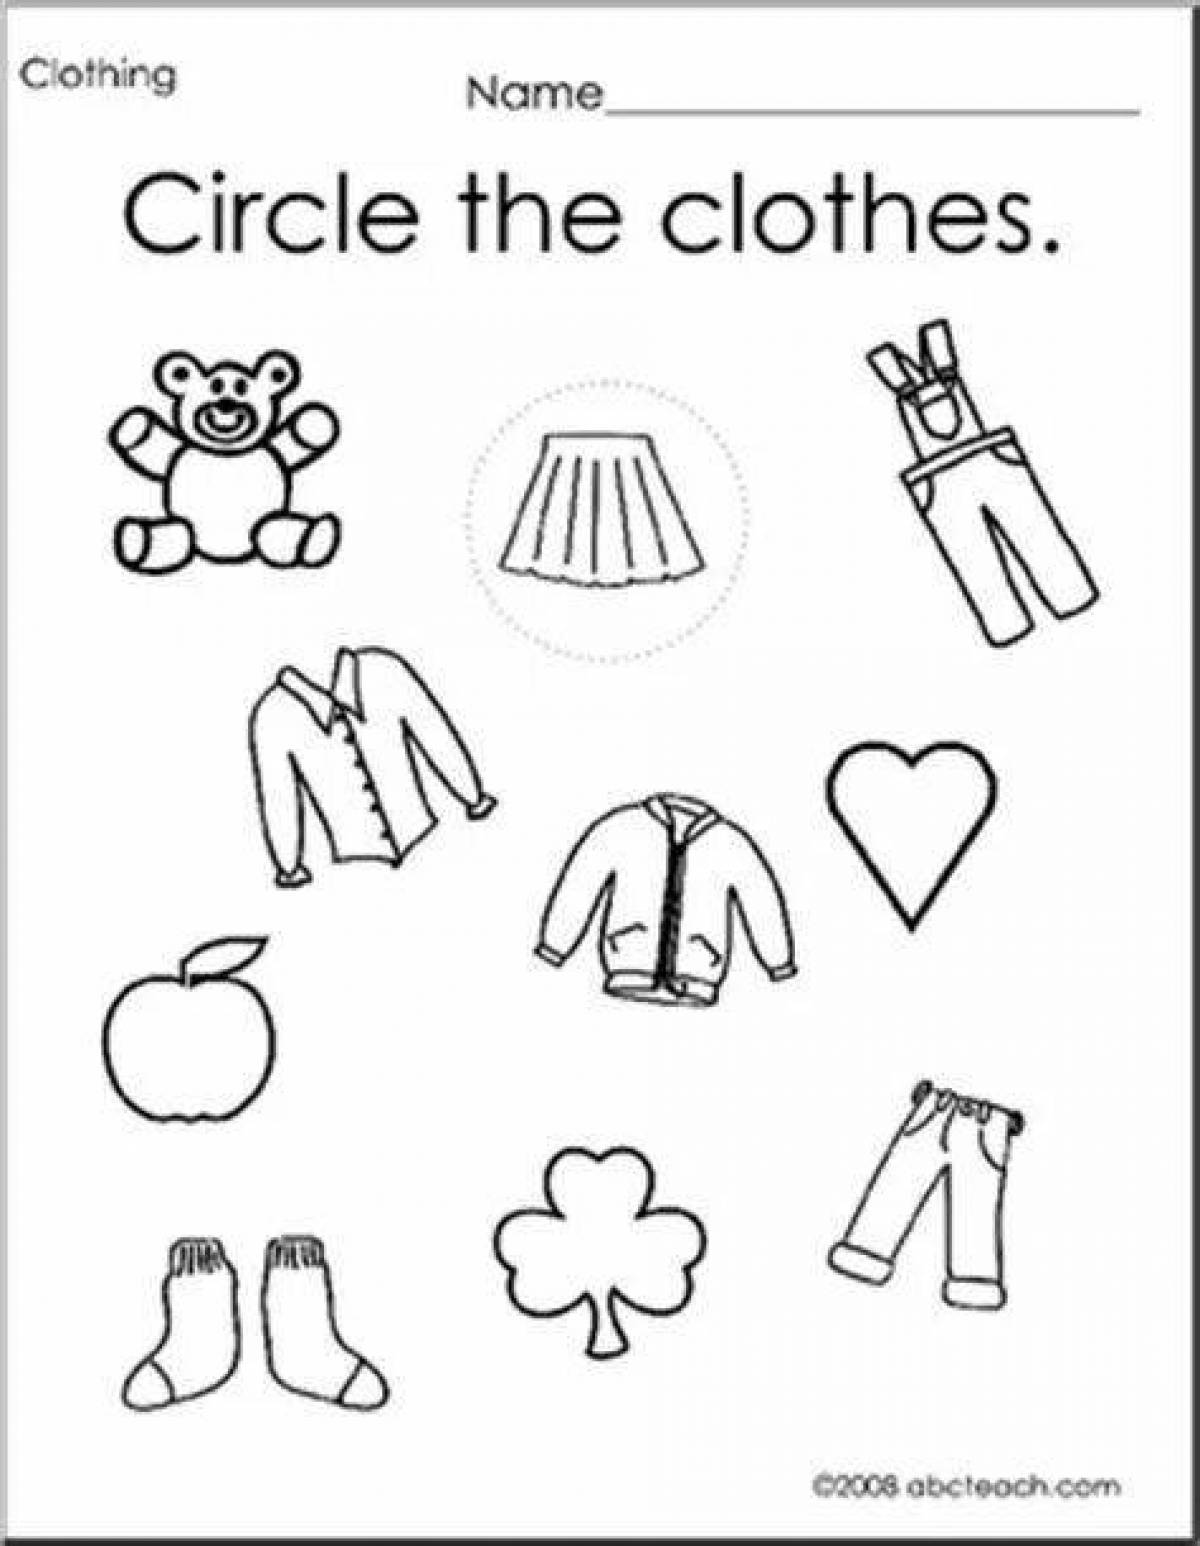 Colourful children's clothes coloring page